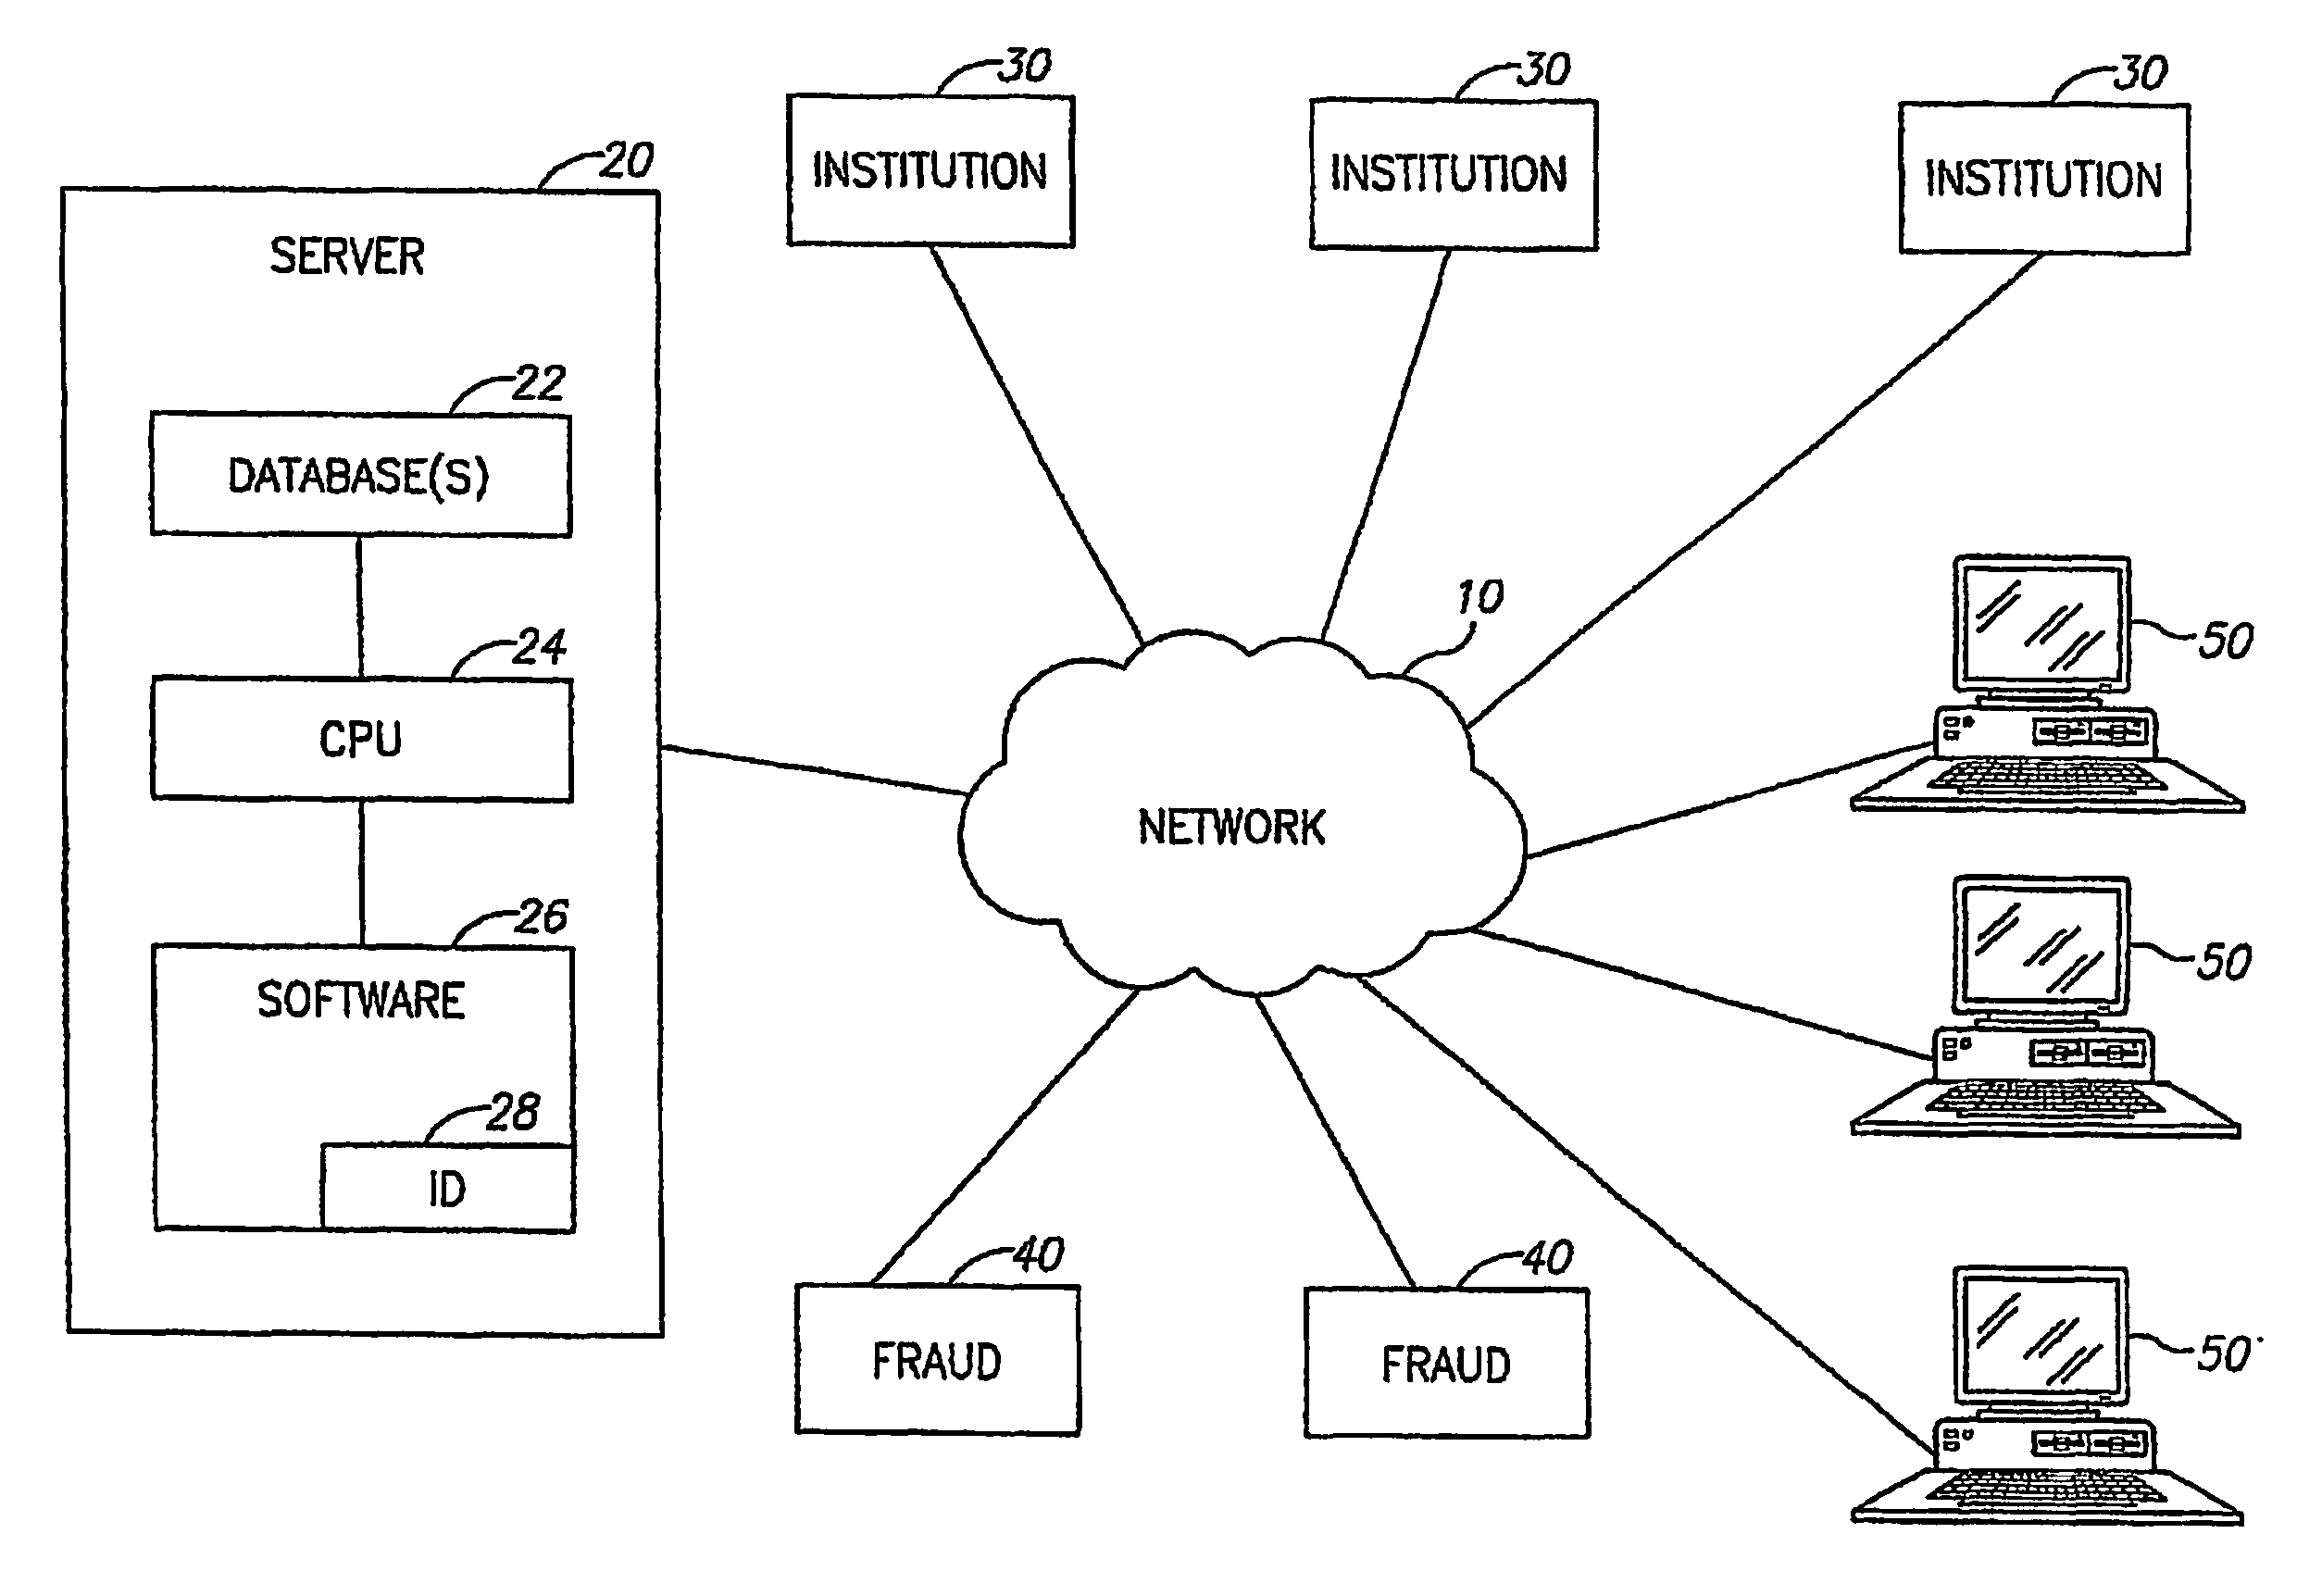 System and method of addressing email and electronic communication fraud